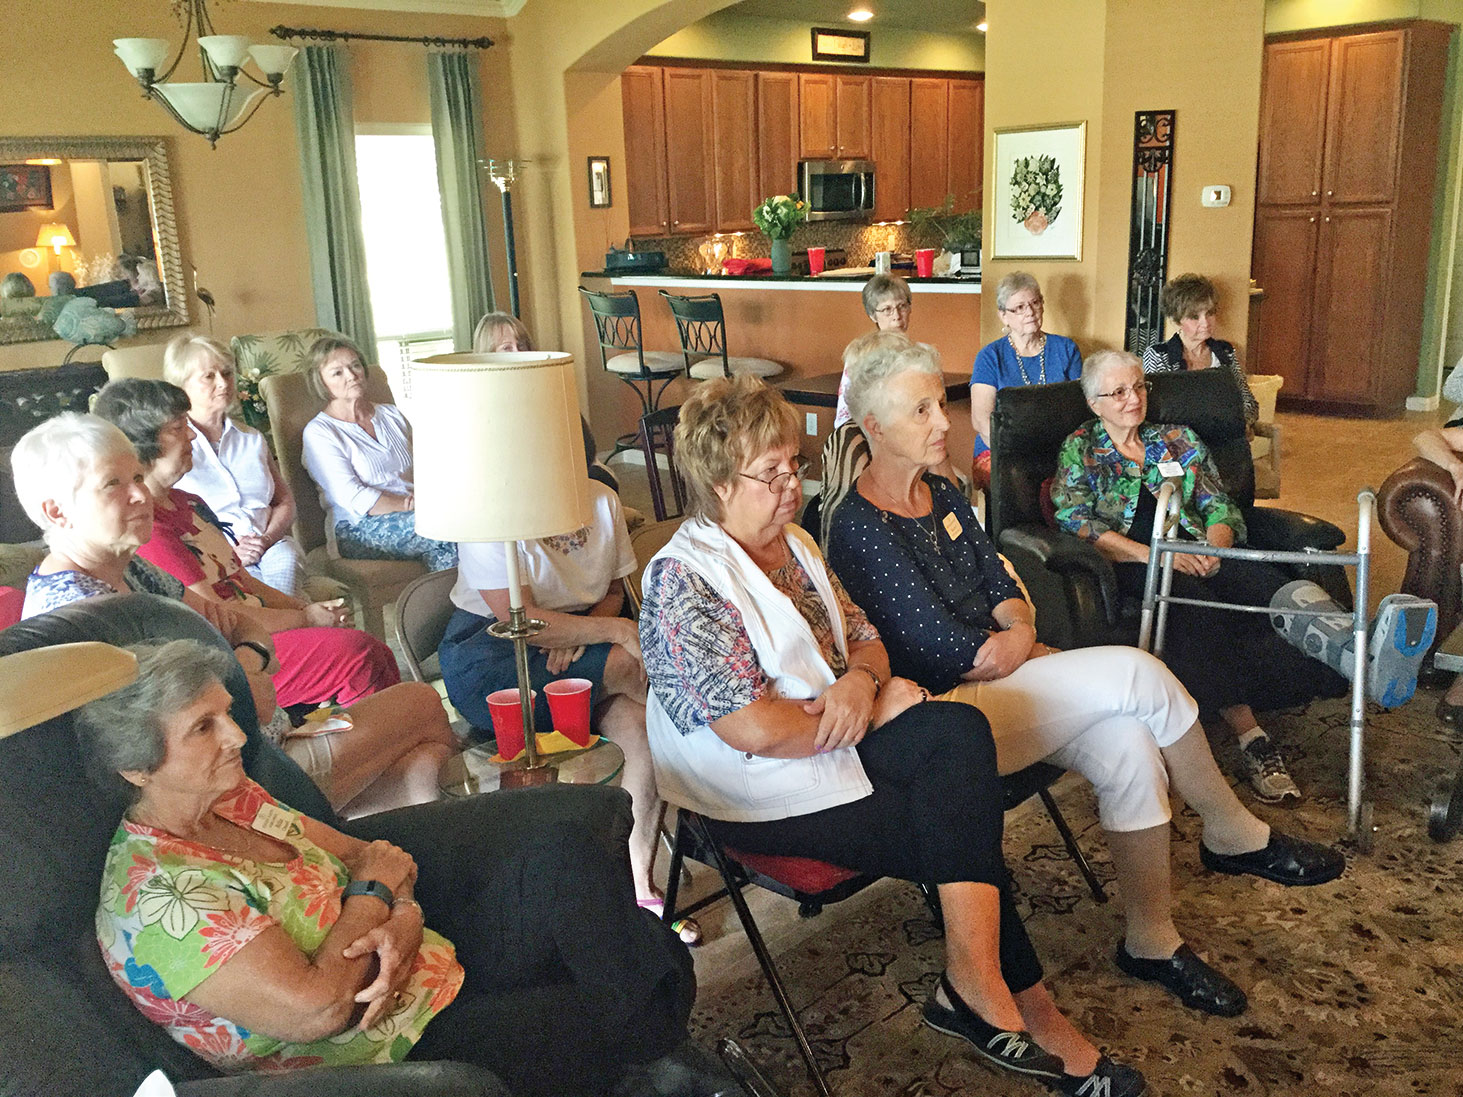 Attentive attendees: Billie Connell, Nancy Nevius, Peggy Zilinsky, Guest, Donna Hornsby from GA, Cathy Woods, Renee Carlson, Pauline House, Karen Wesselmann, Karen Payne, Sandra Anderson, Martha Crump and Vicky Ware